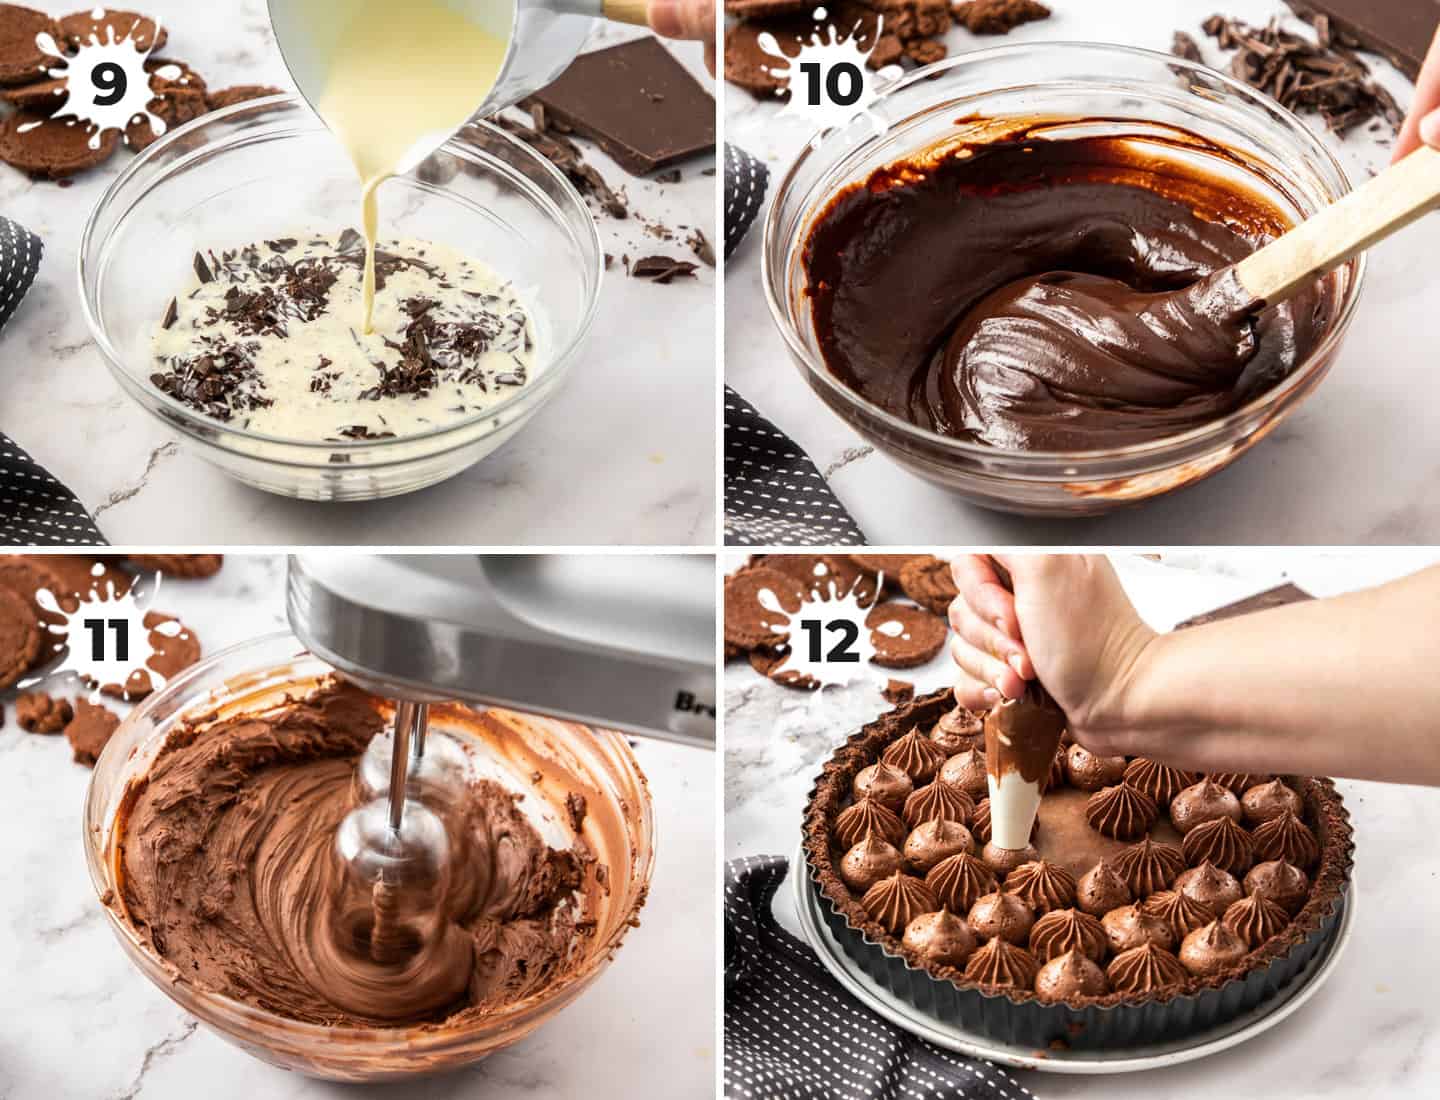 A collage of 4 images showing how to make and pipe the whipped chocolate ganache.